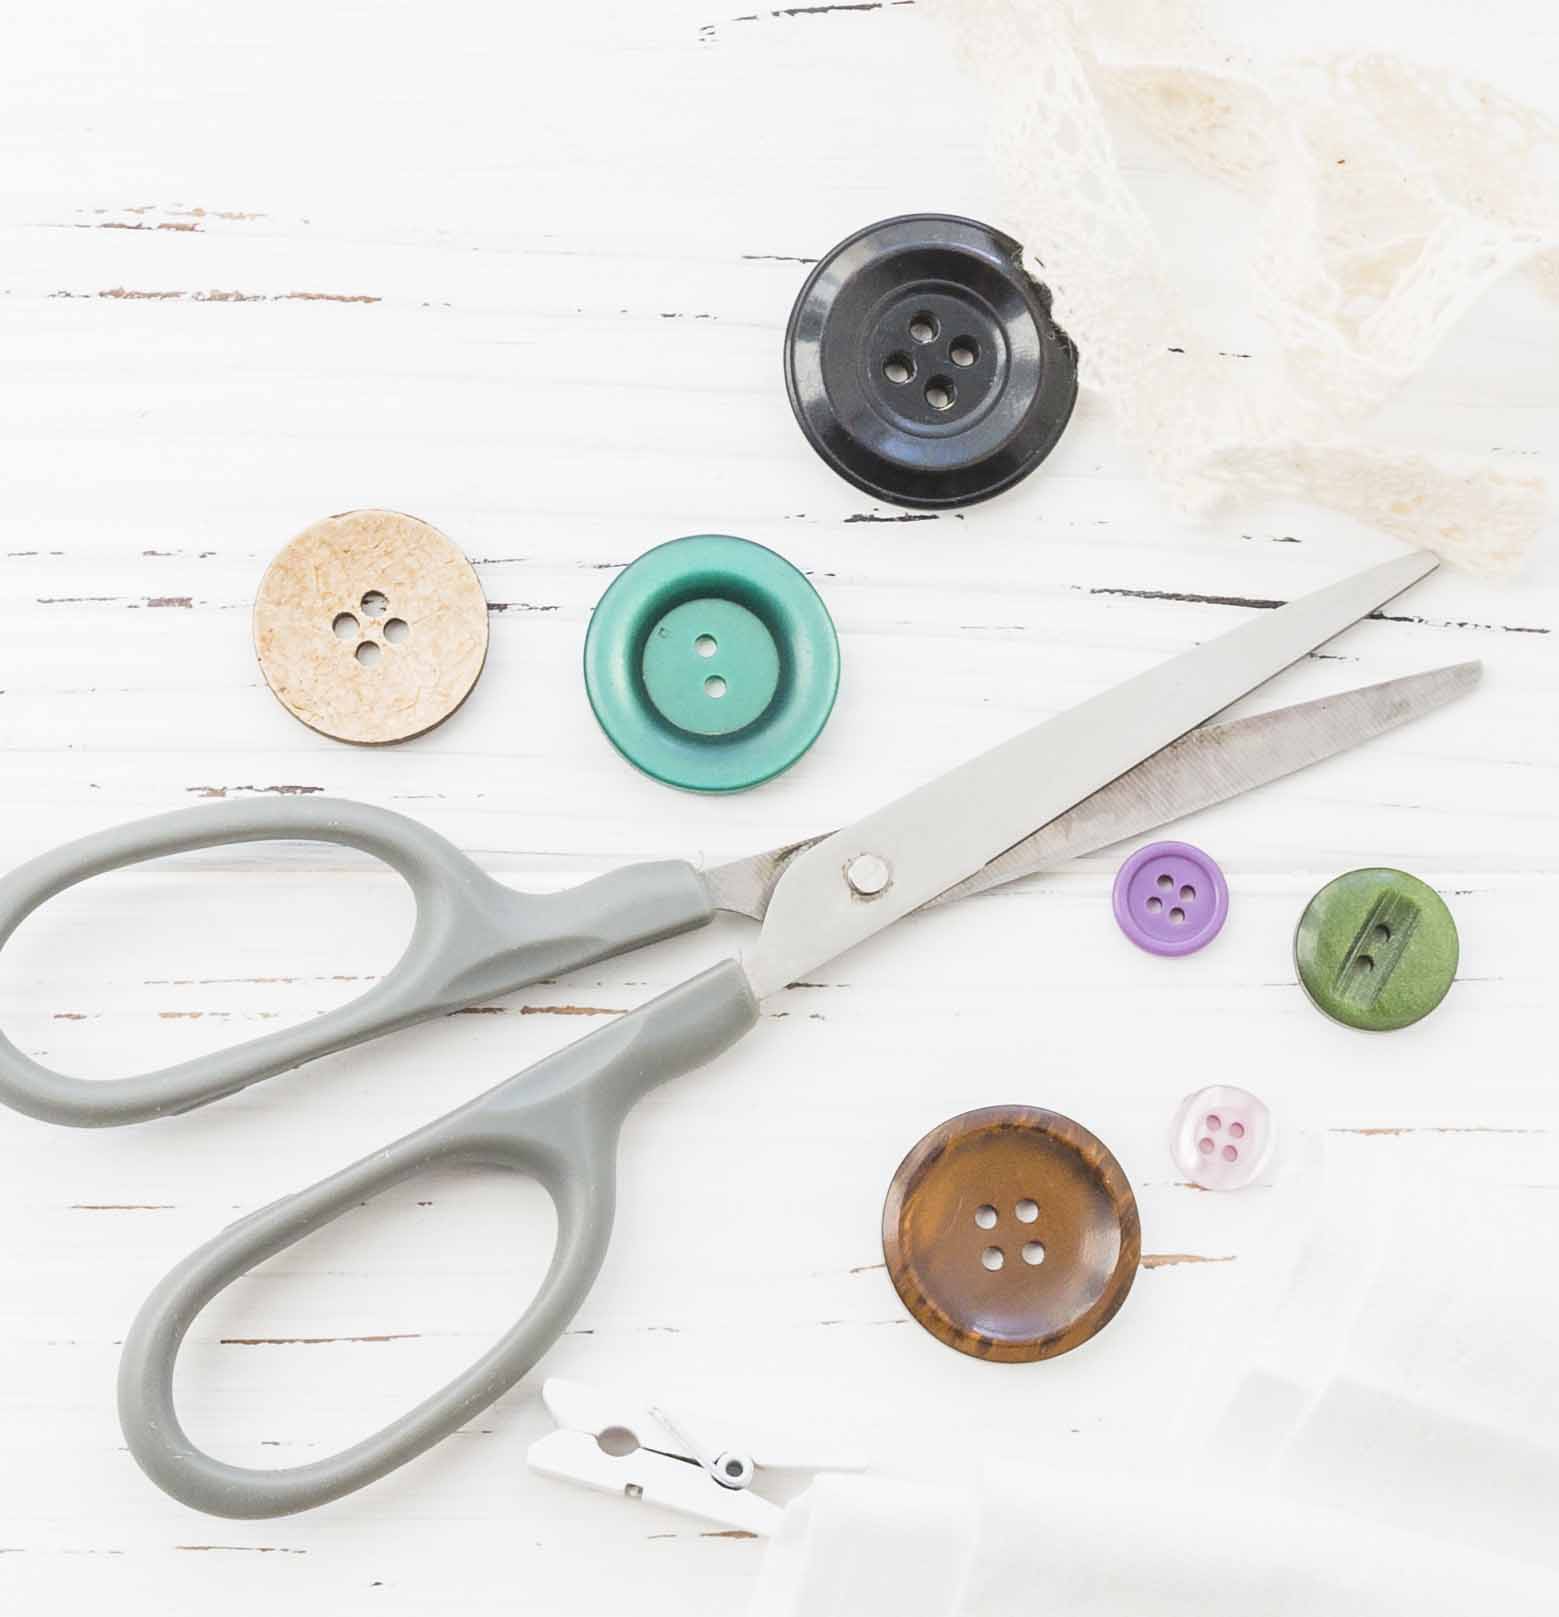 An image of buttons and scissors